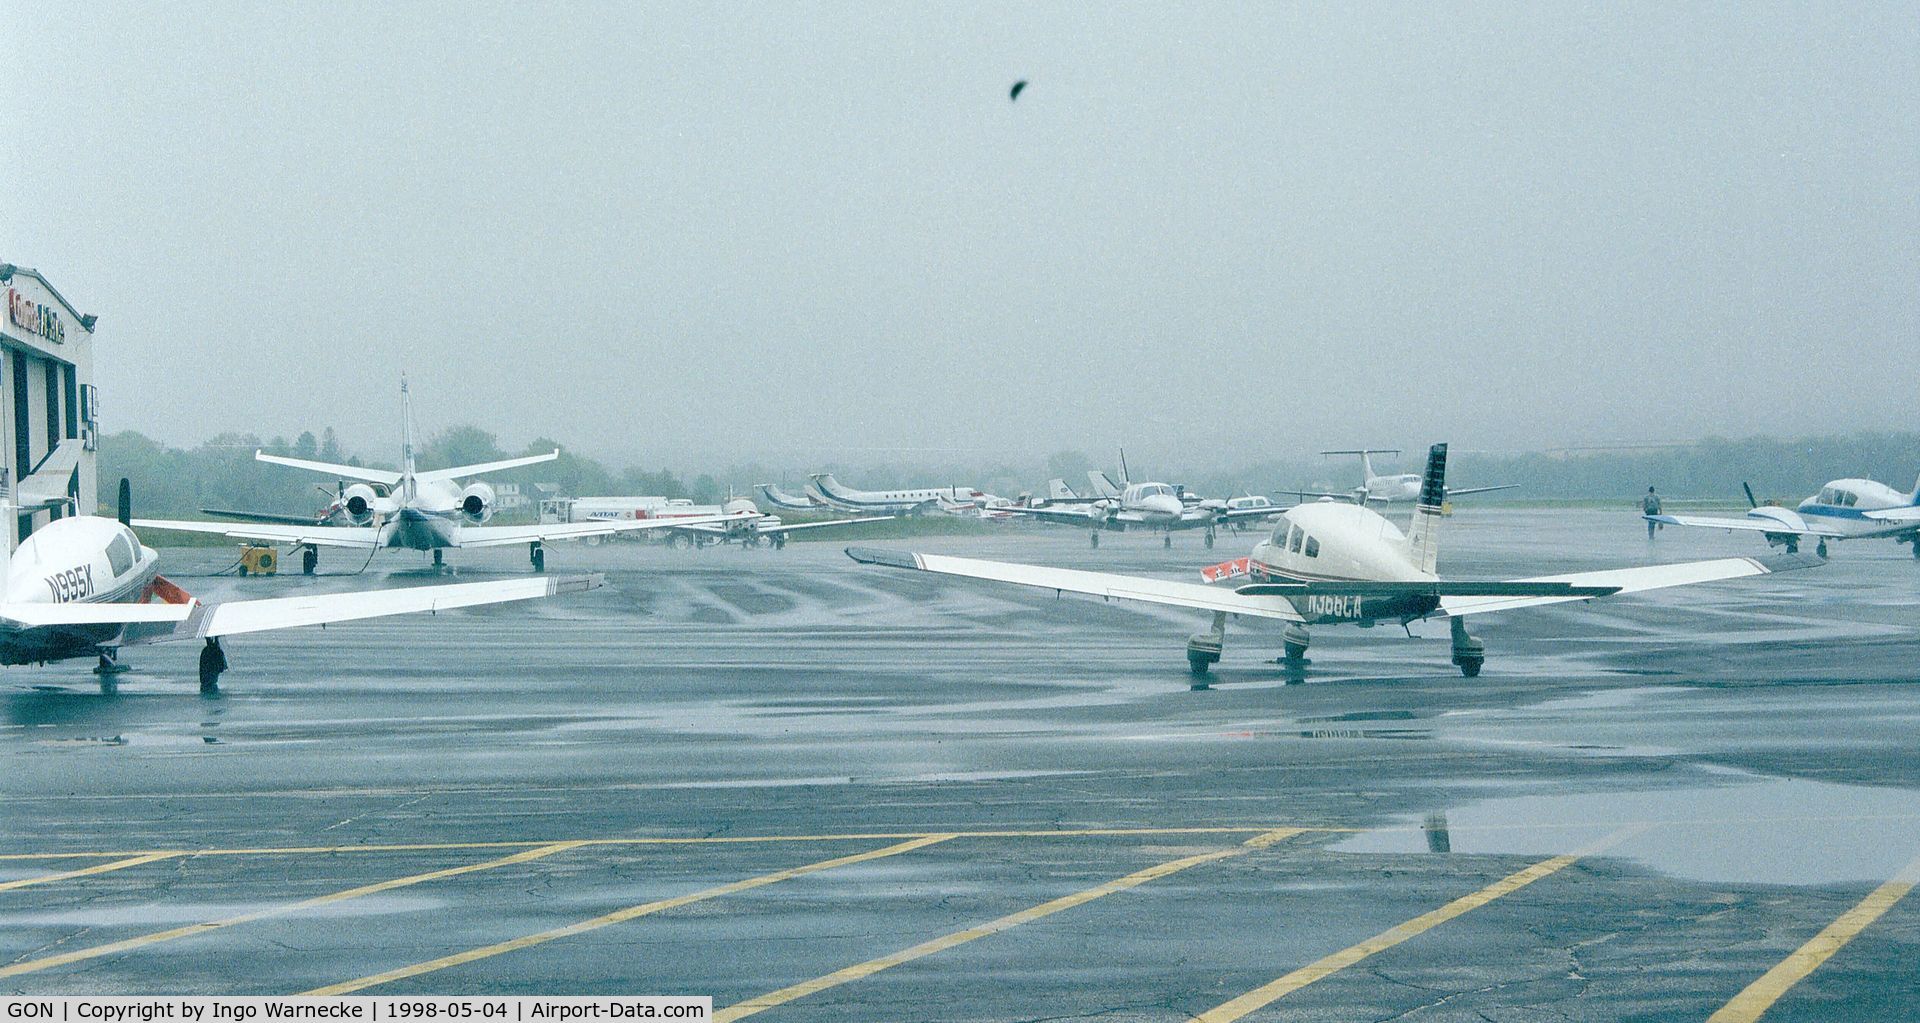 Groton-new London Airport (GON) - Groton-New London airport apron on a rainy day